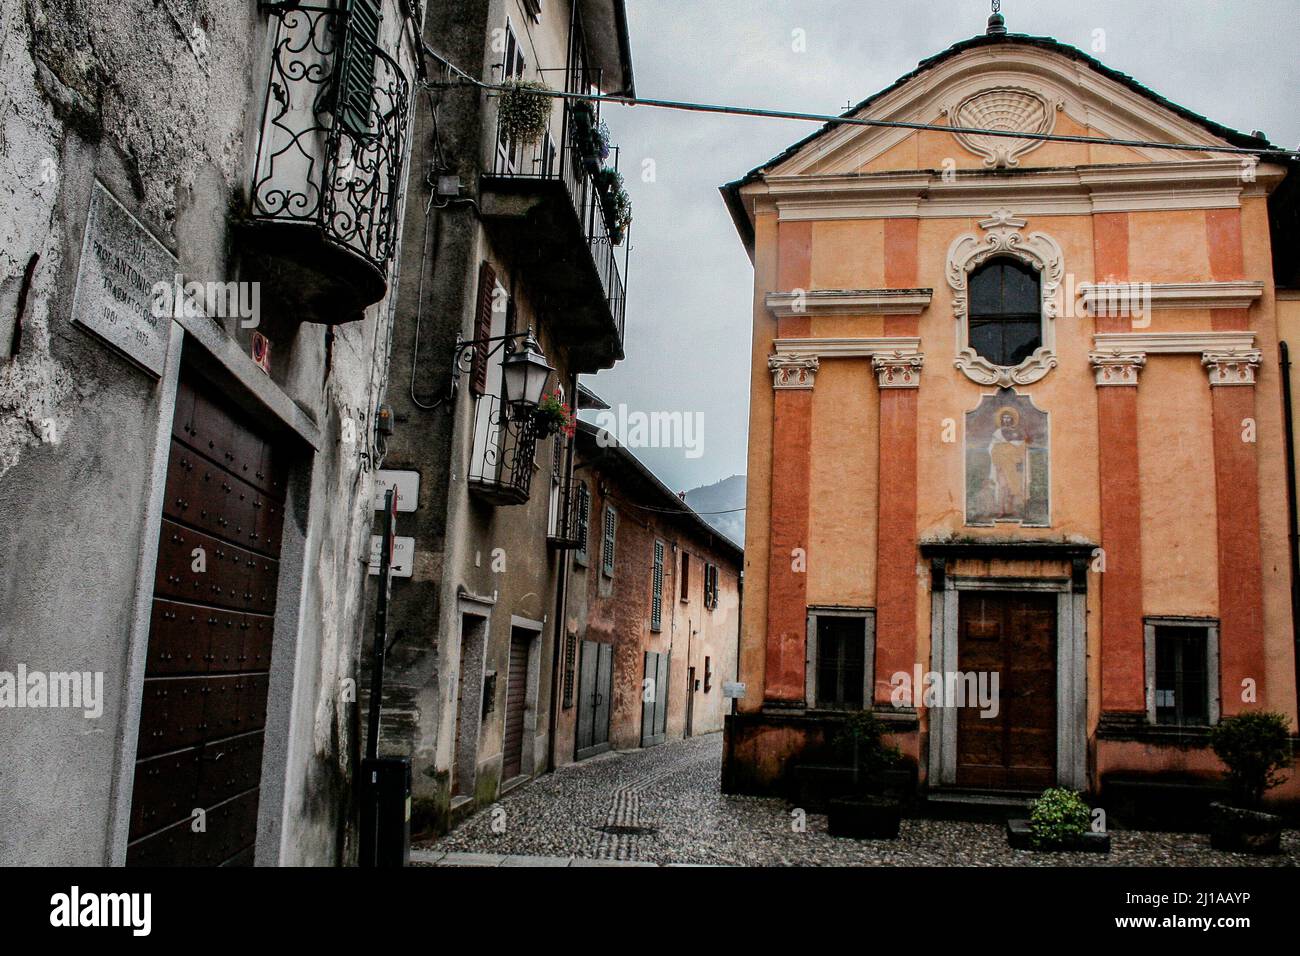 Orta San Giulio, an Italian town in the province of Novara in Piedmont. It is part of the circuit of the most beautiful villages in Italy. St. Roch church (Oratorio di San Rocco), 16th century. Stock Photo